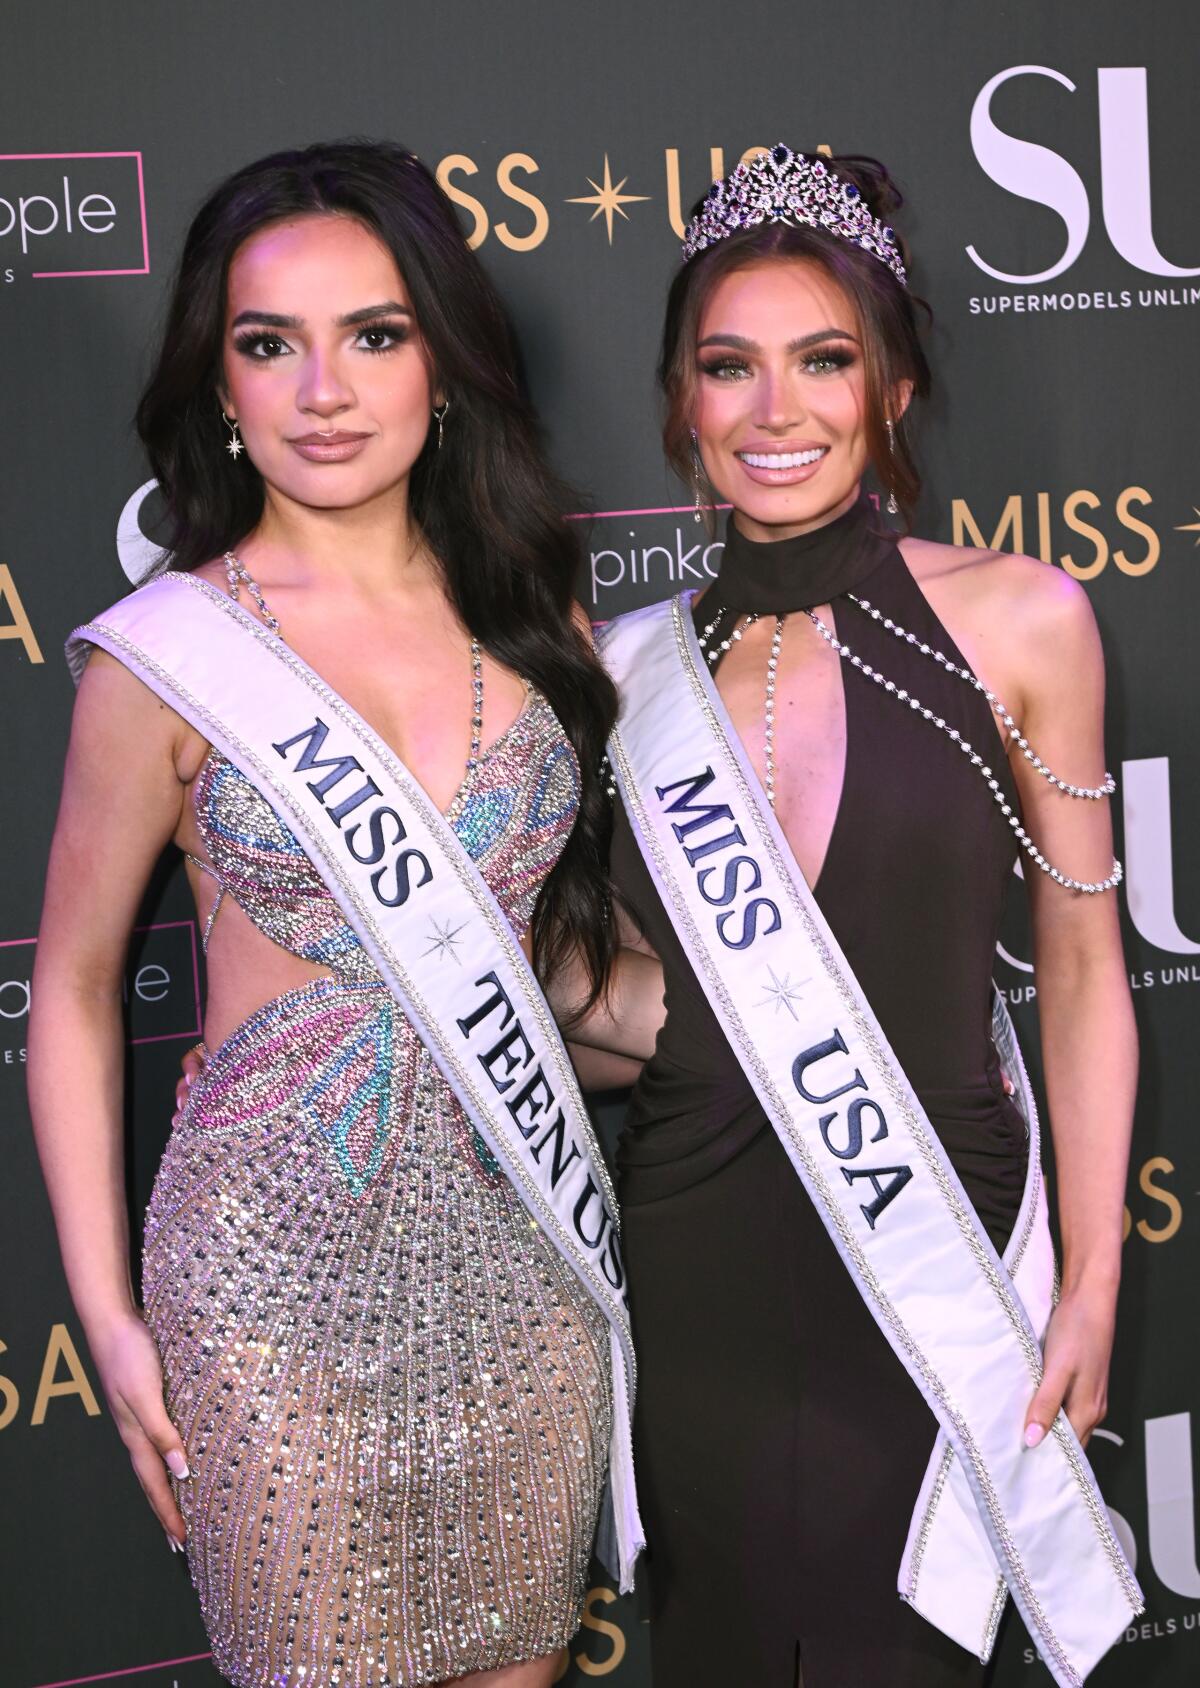 One pageant winner posing in a sash and short bejeweled dress with another winner clad in a sash, tiara, and black dress.